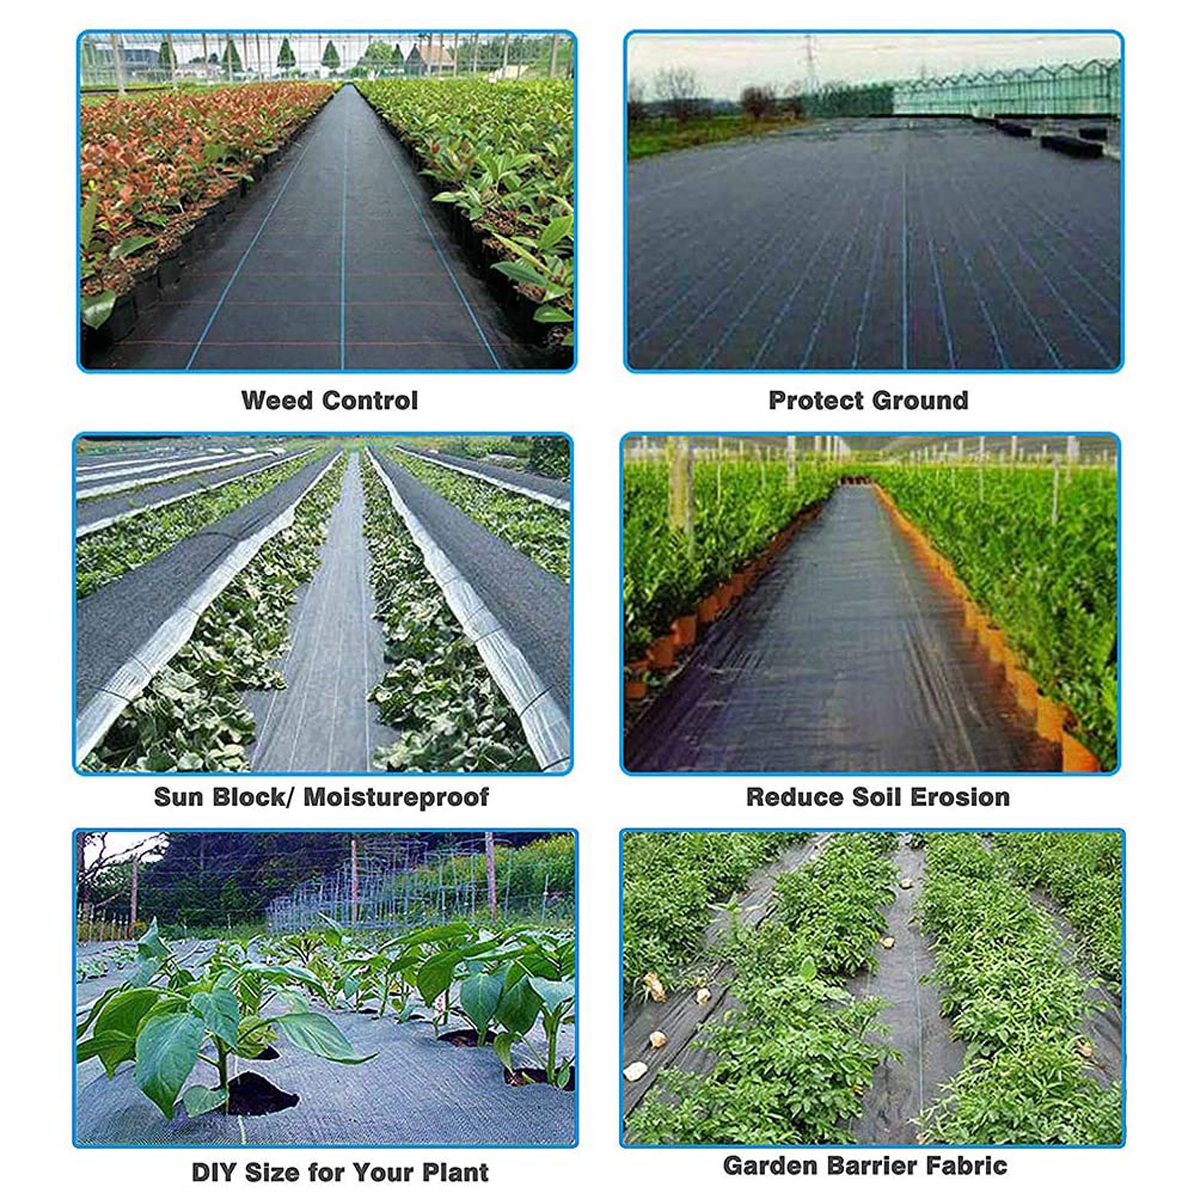 121524m-Wide-70gsm-Weed-Control-Fabric-Ground-Cover-Membrane-Garden-Landscape-1831388-7